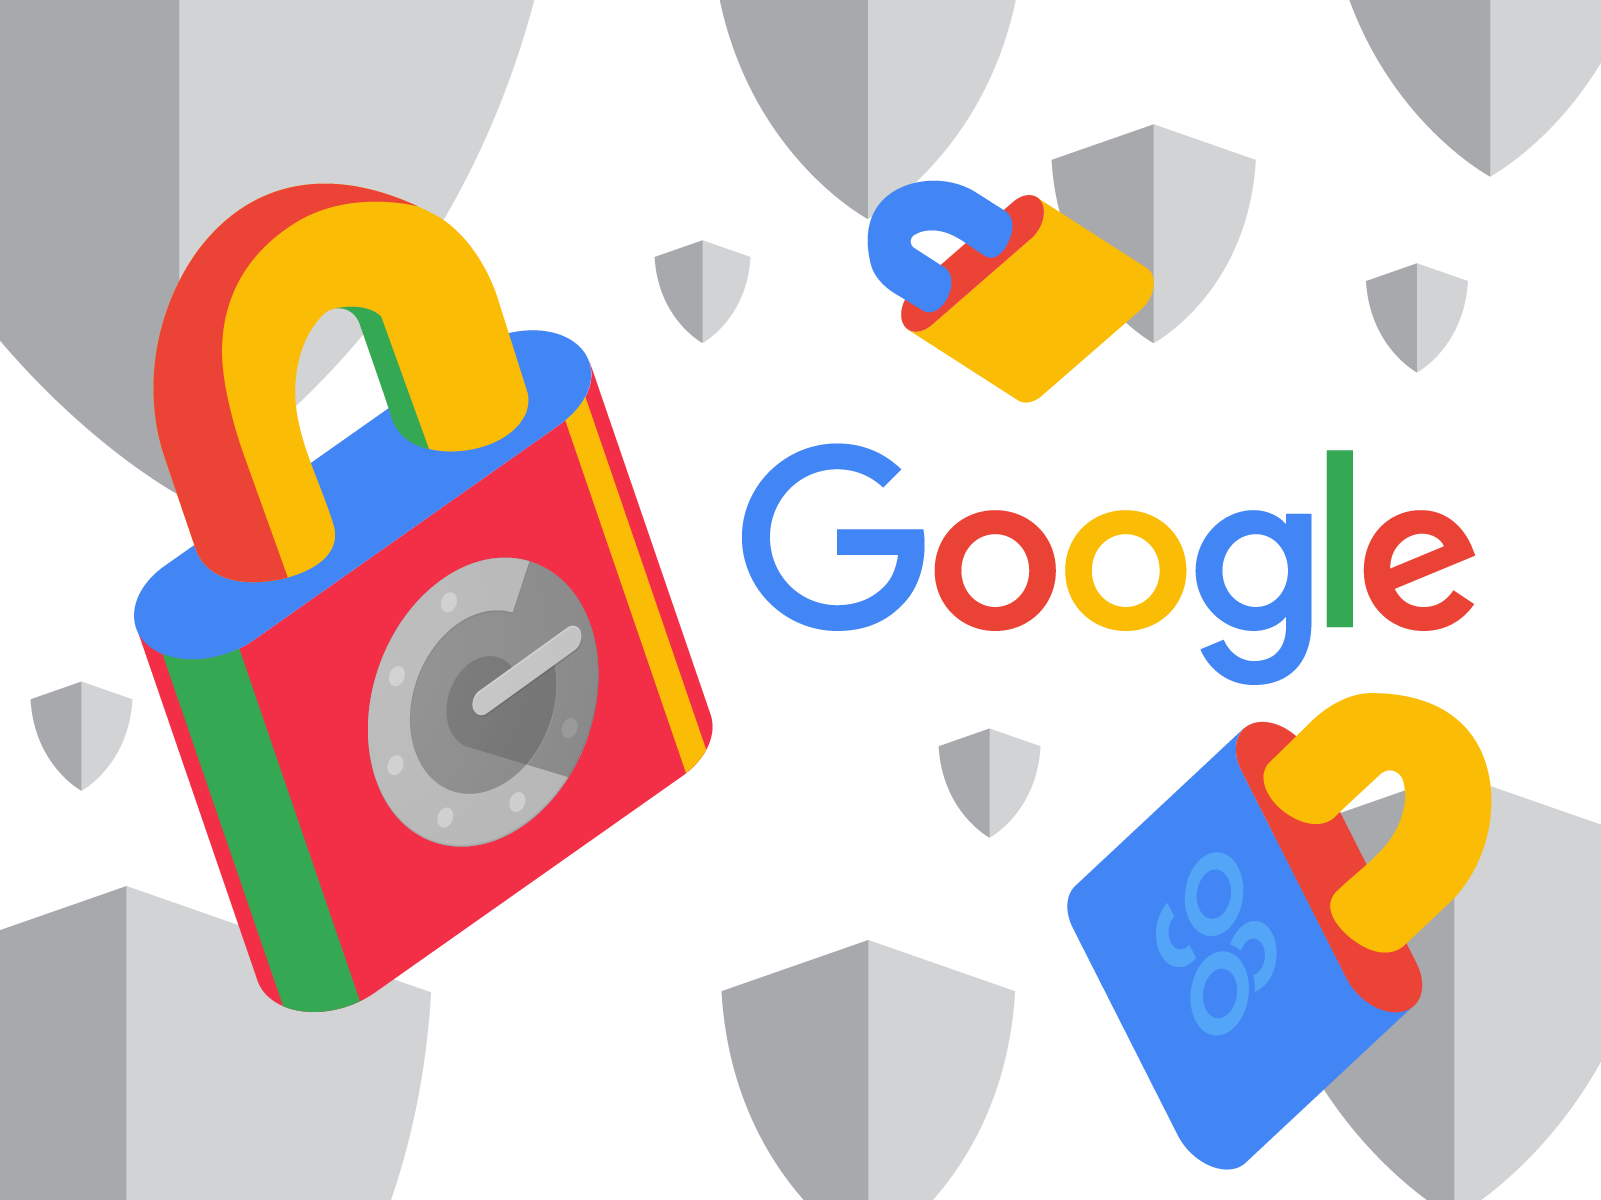 Google Online Security Blog: Google Authenticator now supports